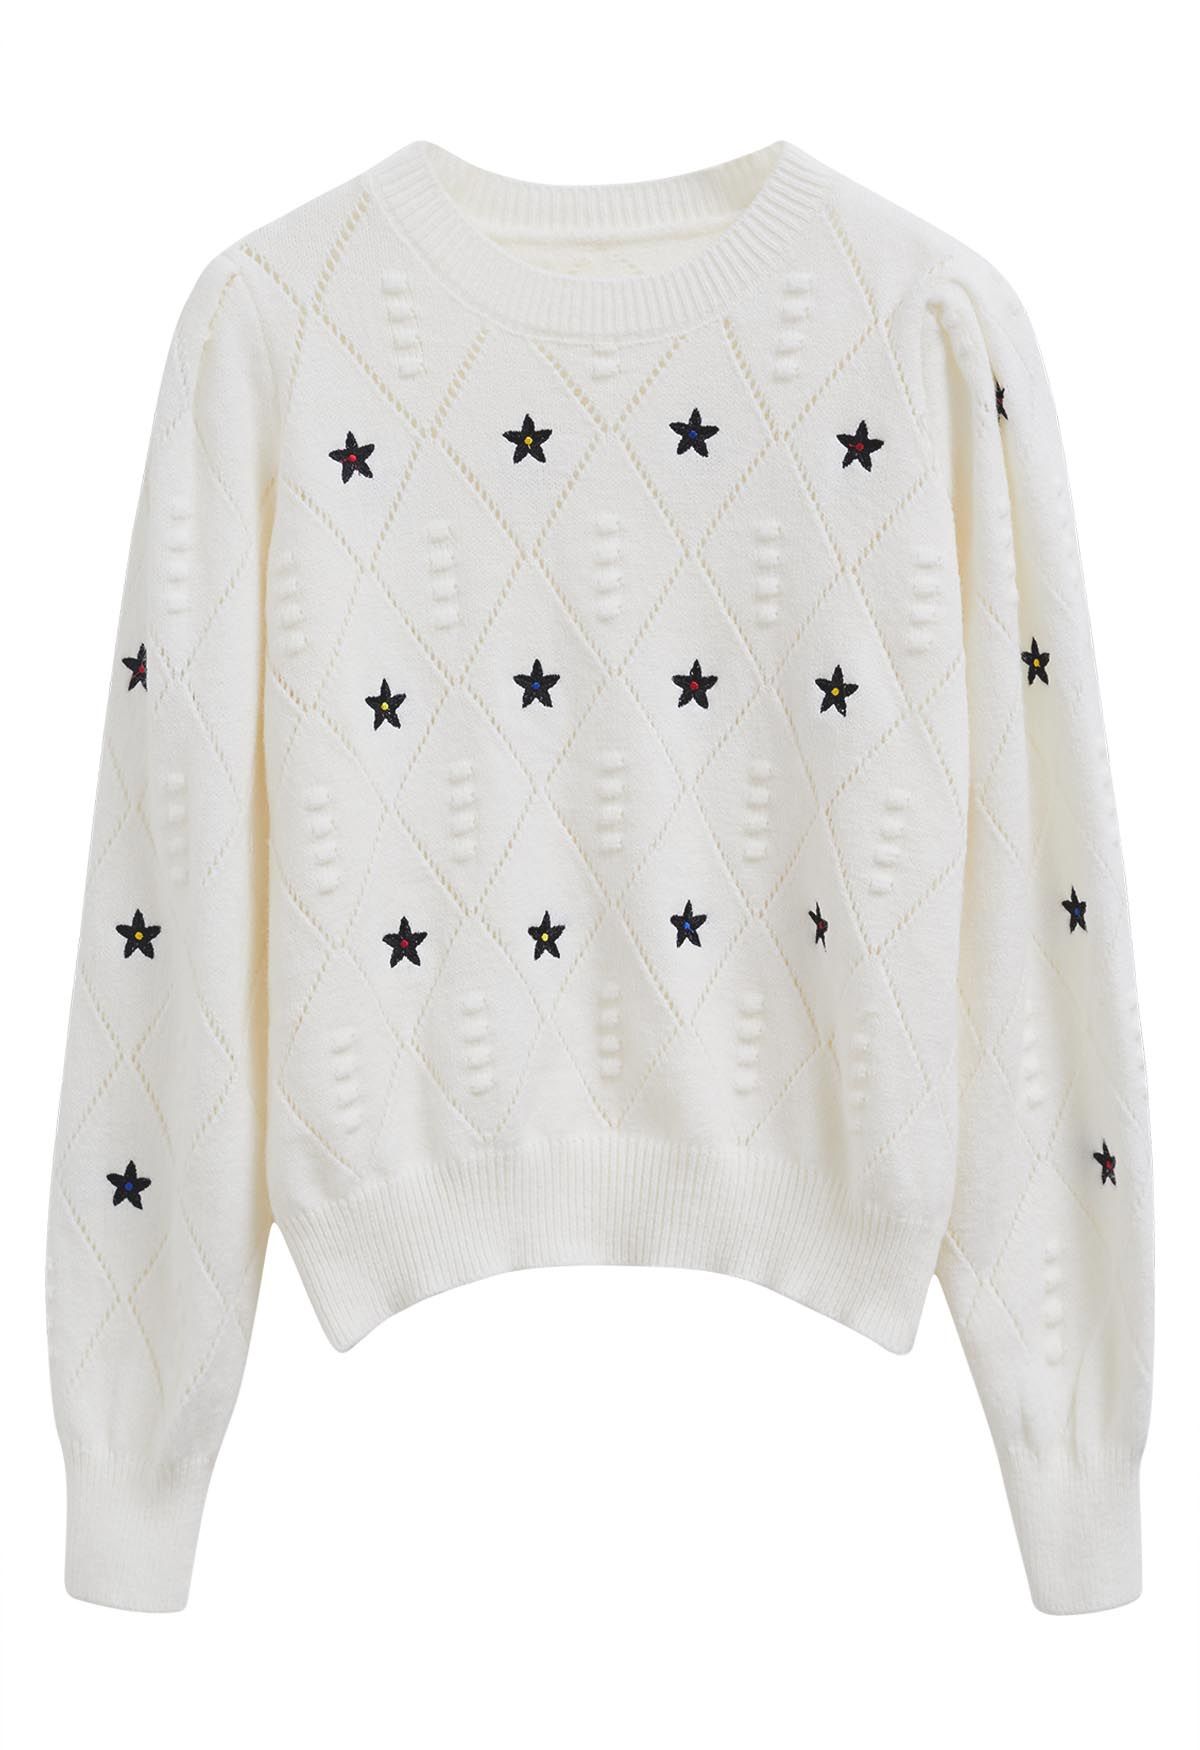 Star Embroidery Pointelle Knit Top in White